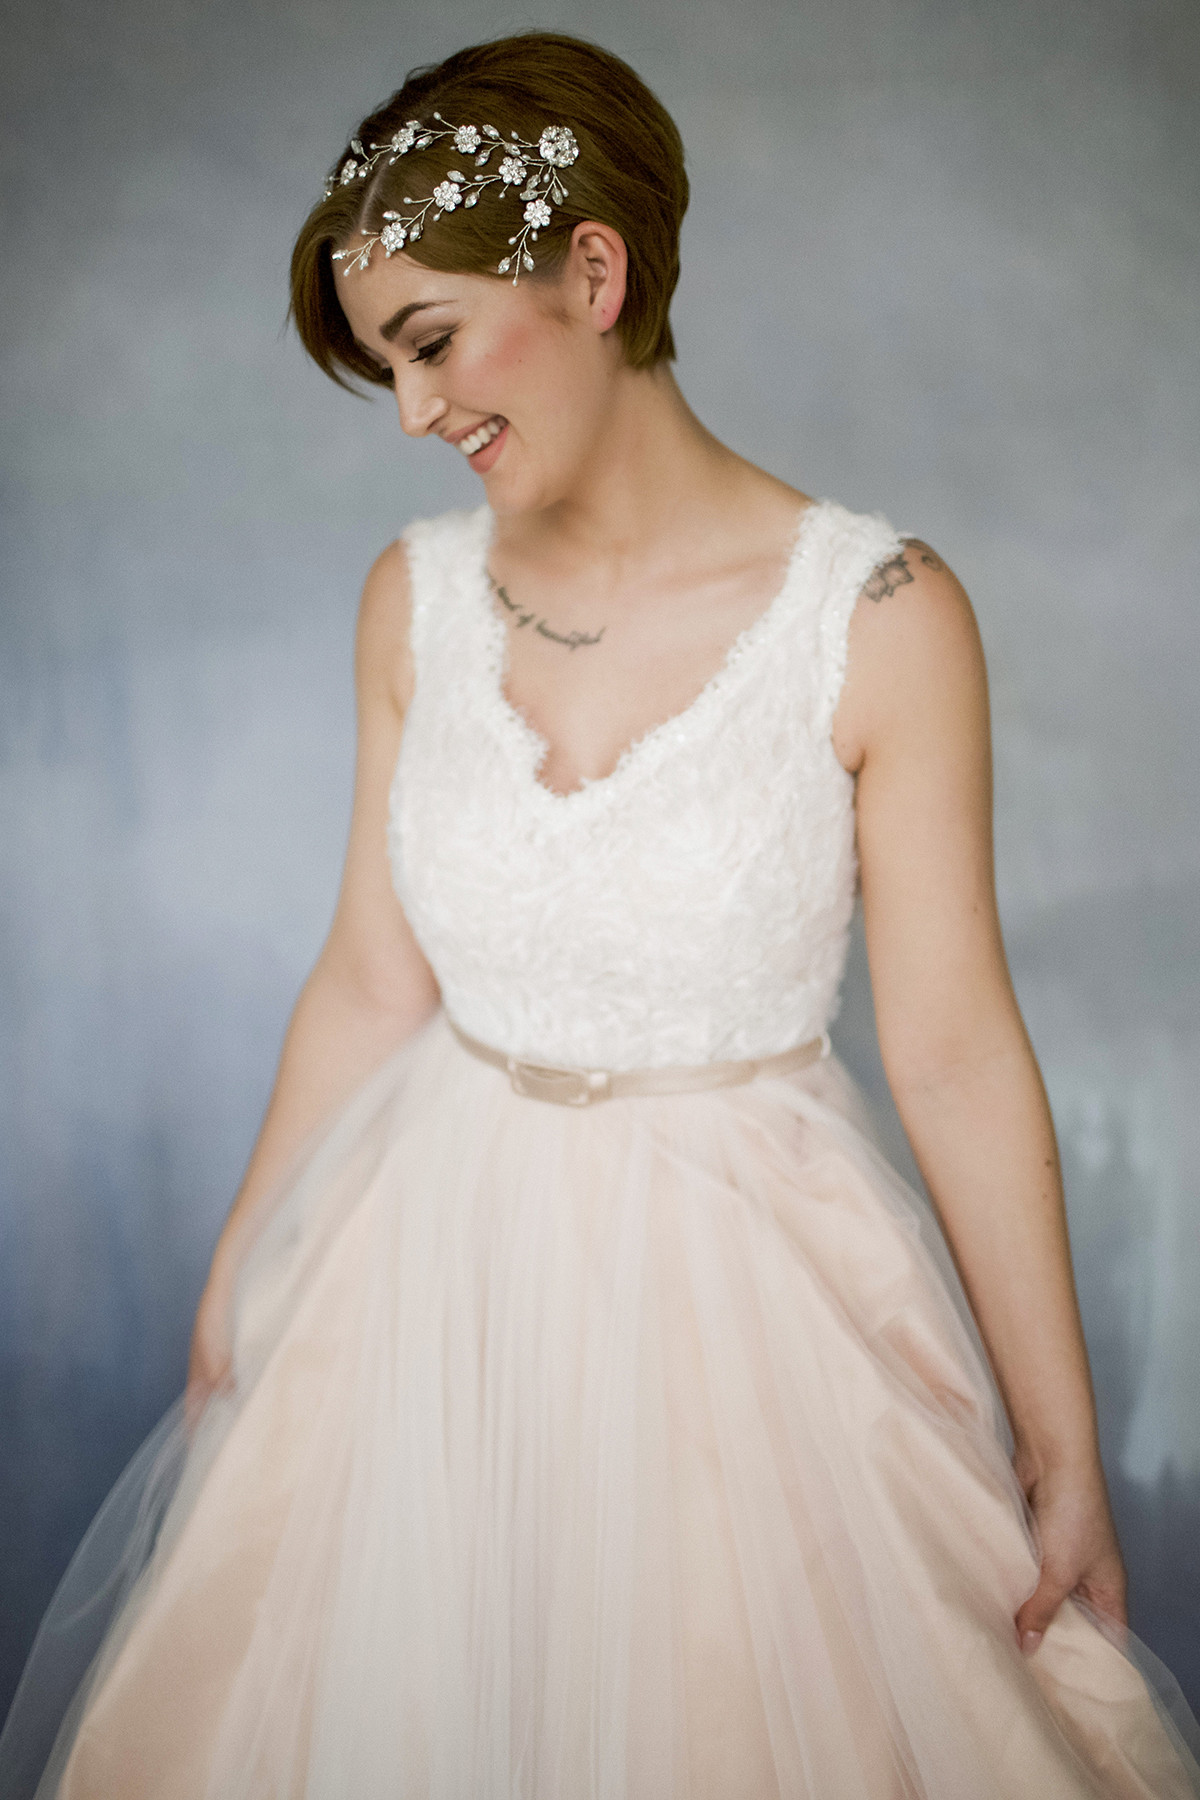 Wedding Dress Styles For Short Brides
 How To Style Wedding Hair Accessories With Short Hair